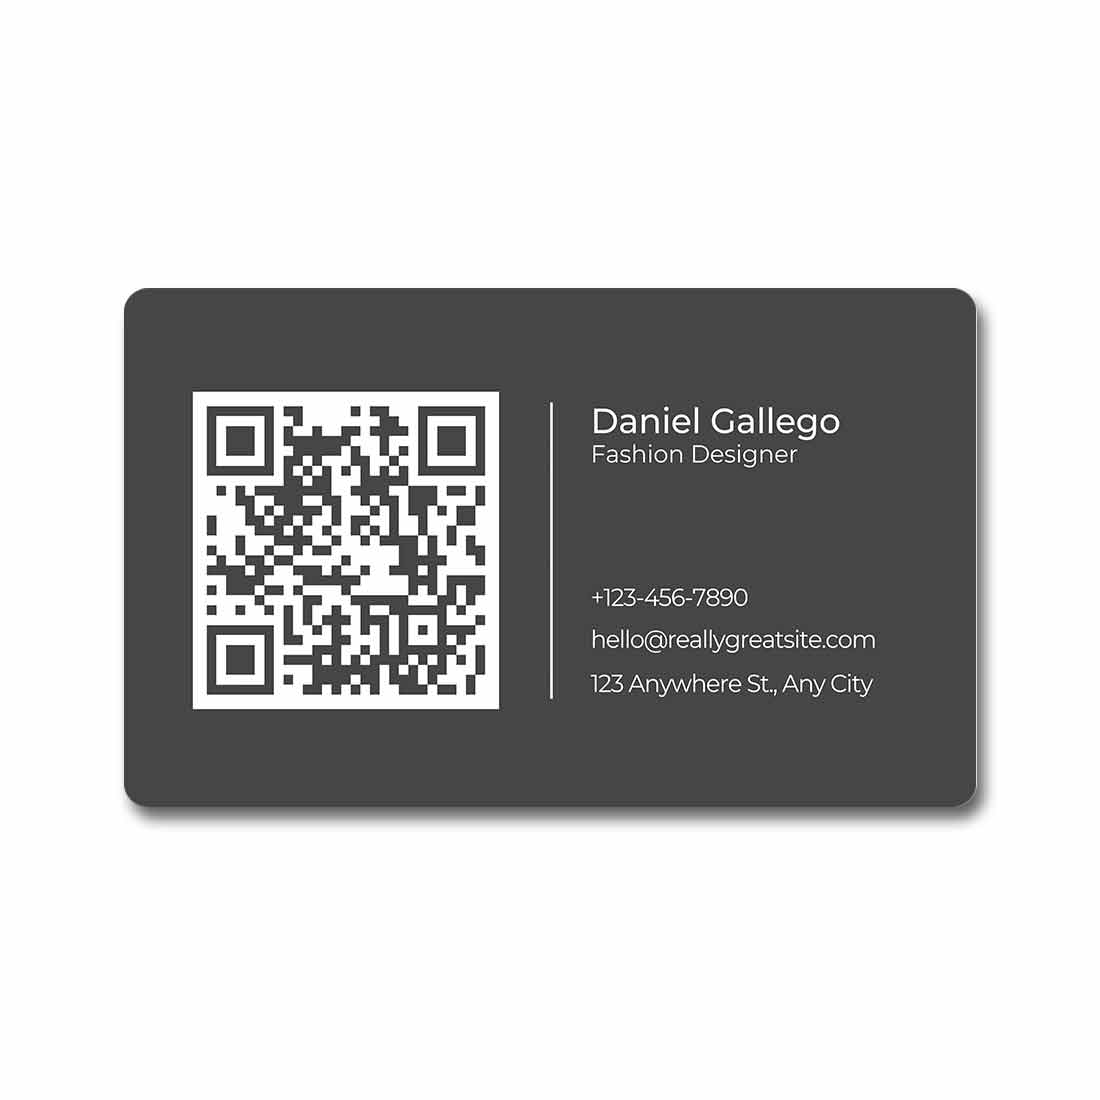 QR Code Visiting Card with NFC Business Card-Scan or Tap to Share Your Contact